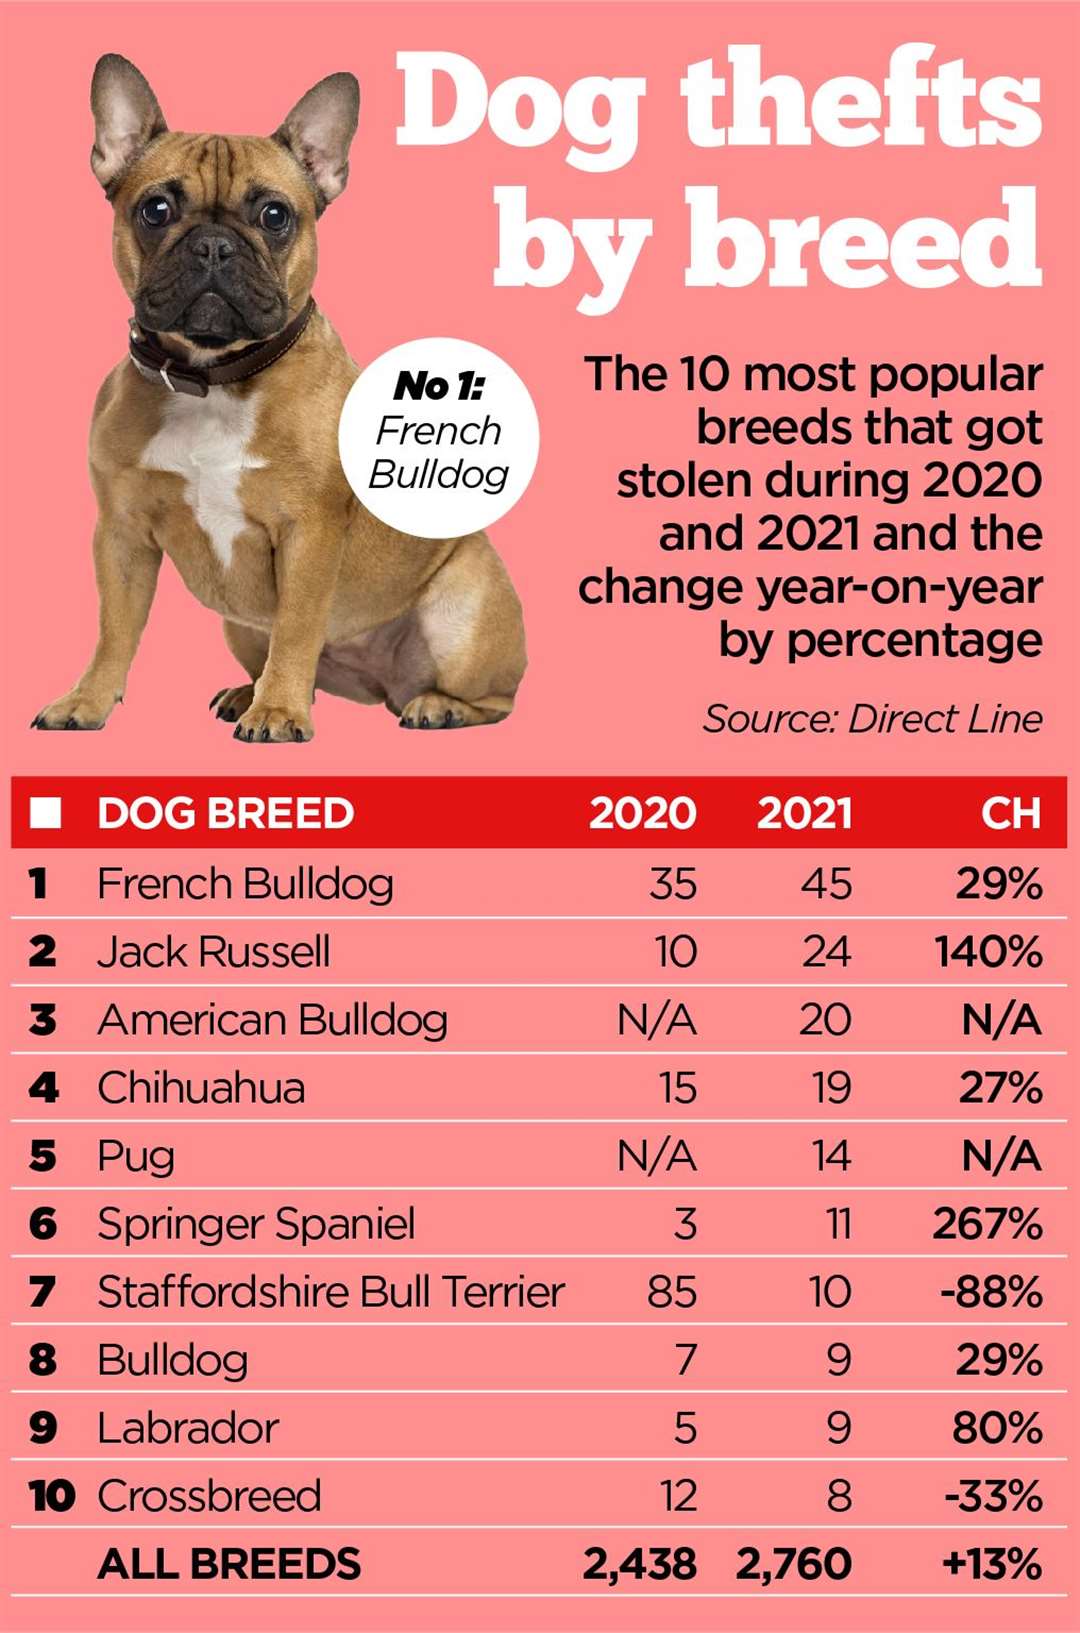 Dog thefts by breed according to research by Direct Line